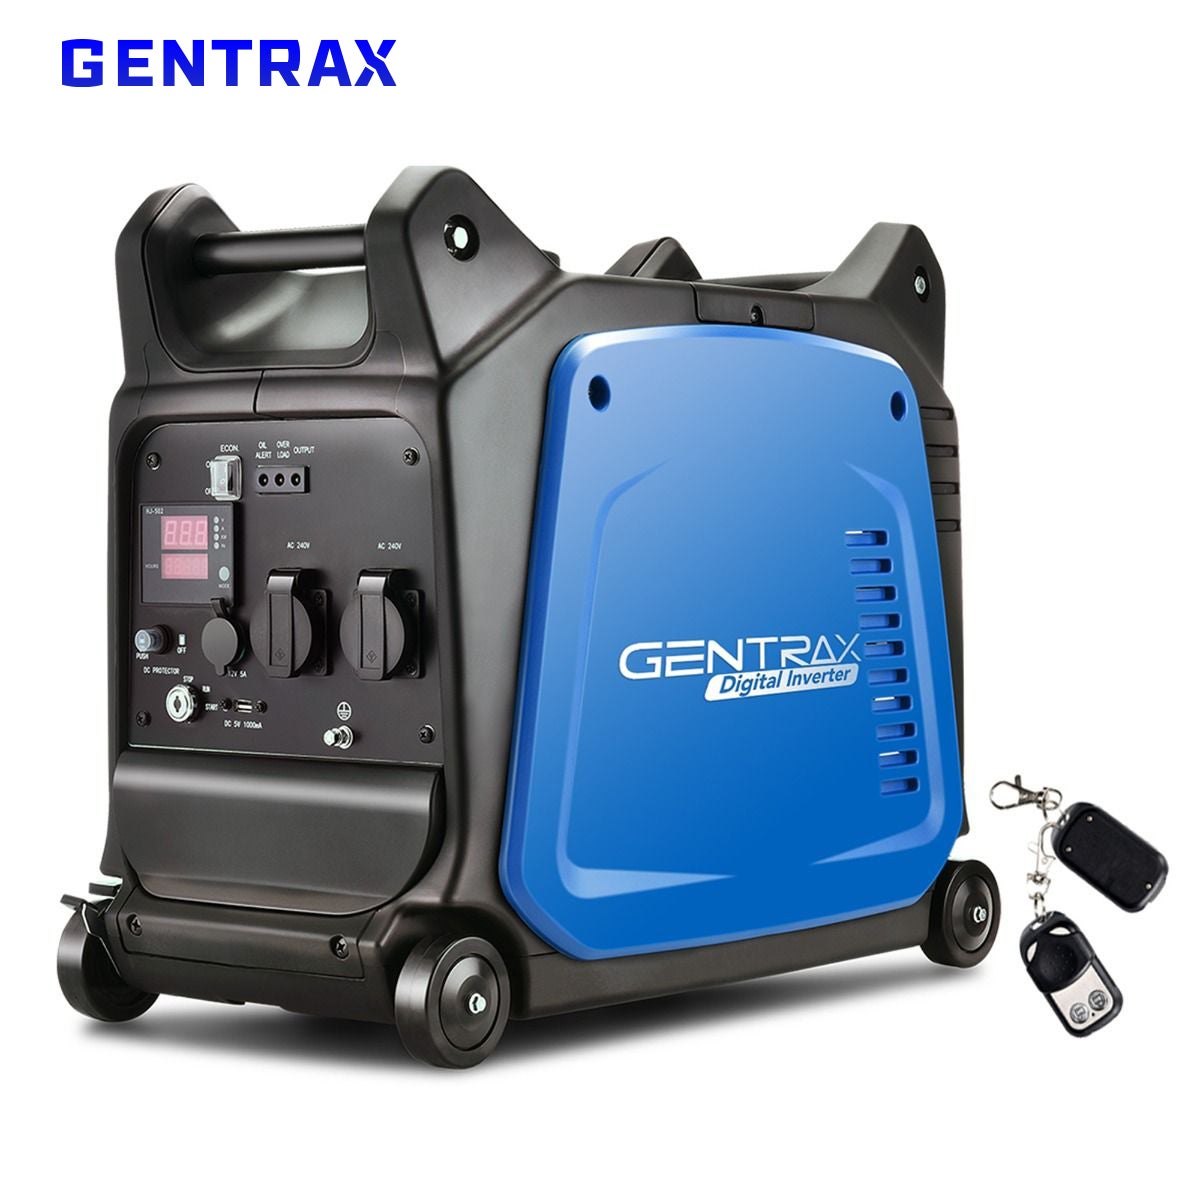 Gentrax Portable Inverter Generator 3.5KW Max 3.2KW Rated Remote Start ...